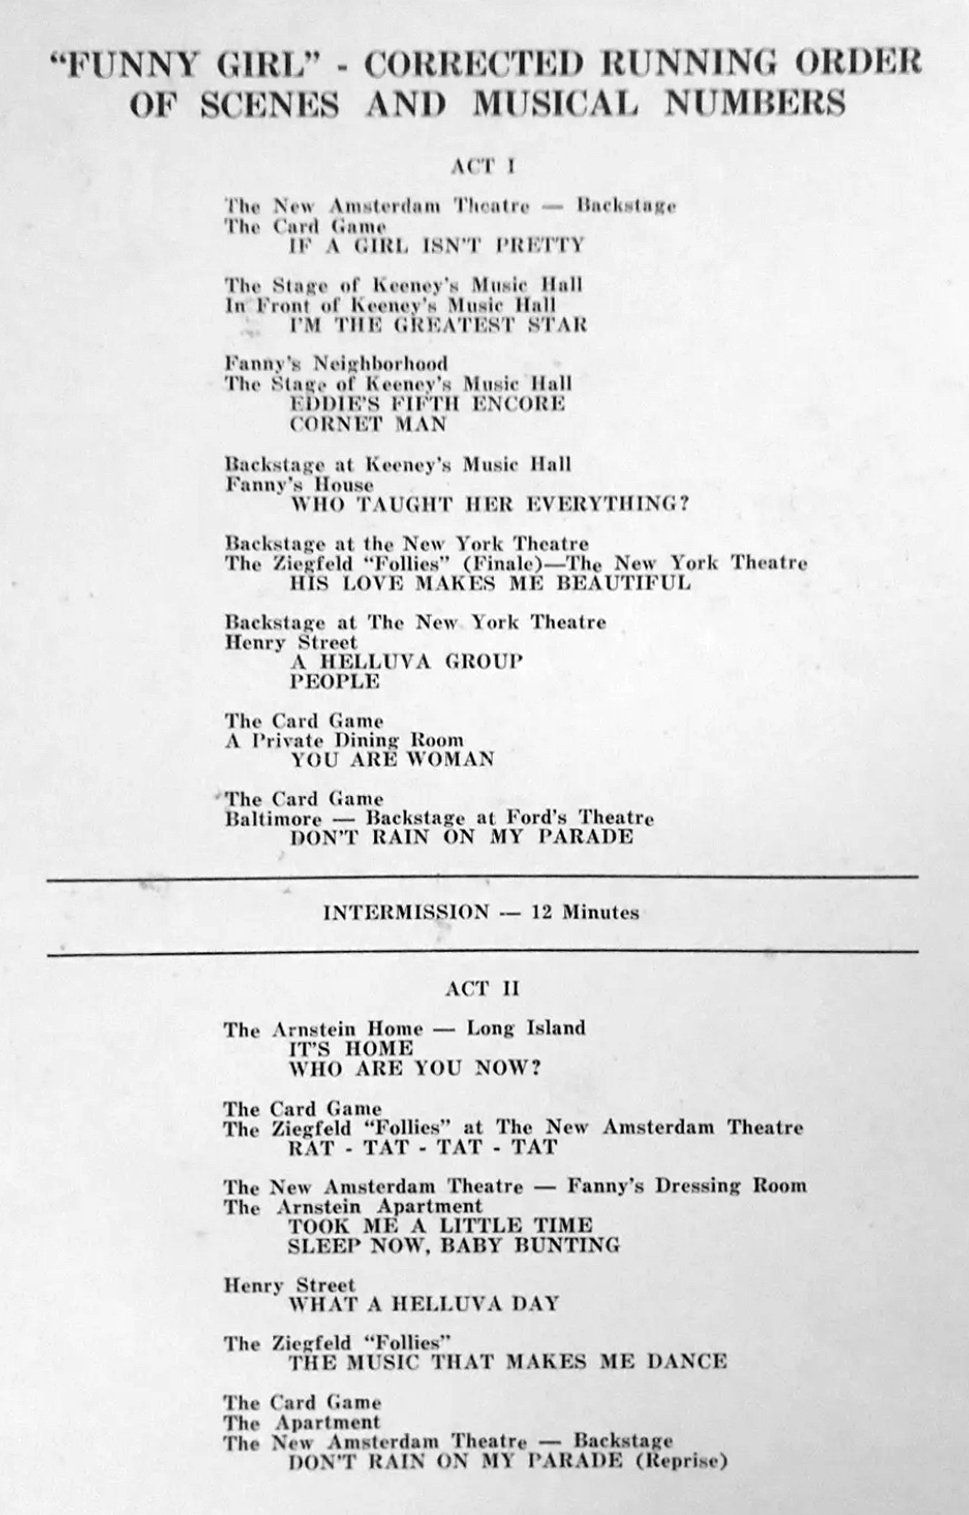 January 13, 1964 list of songs in Funny Girl.